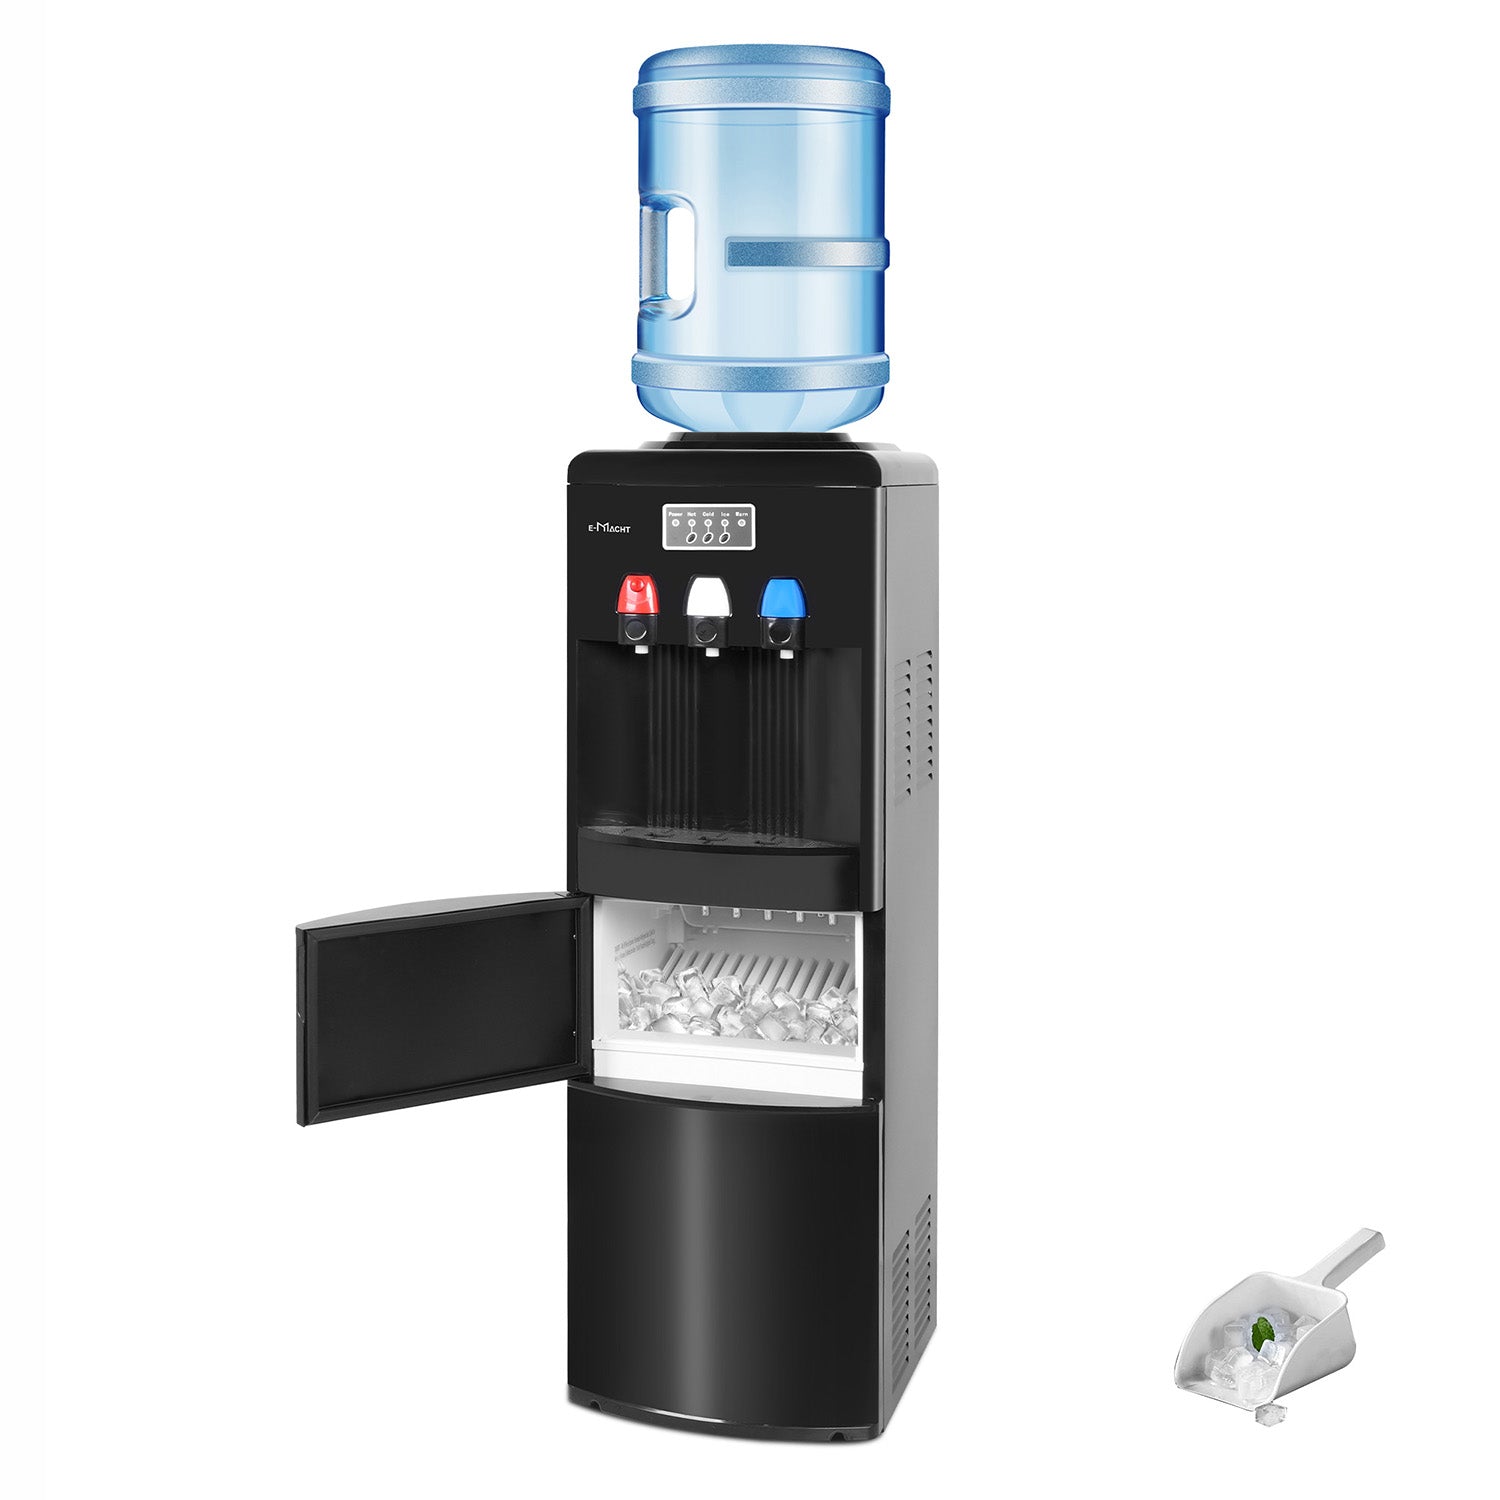 2 in 1 Water Cooler Dispenser for 3-5 Gallon Bottle with Scoop, Ice Maker, Child Safety Lock, Black